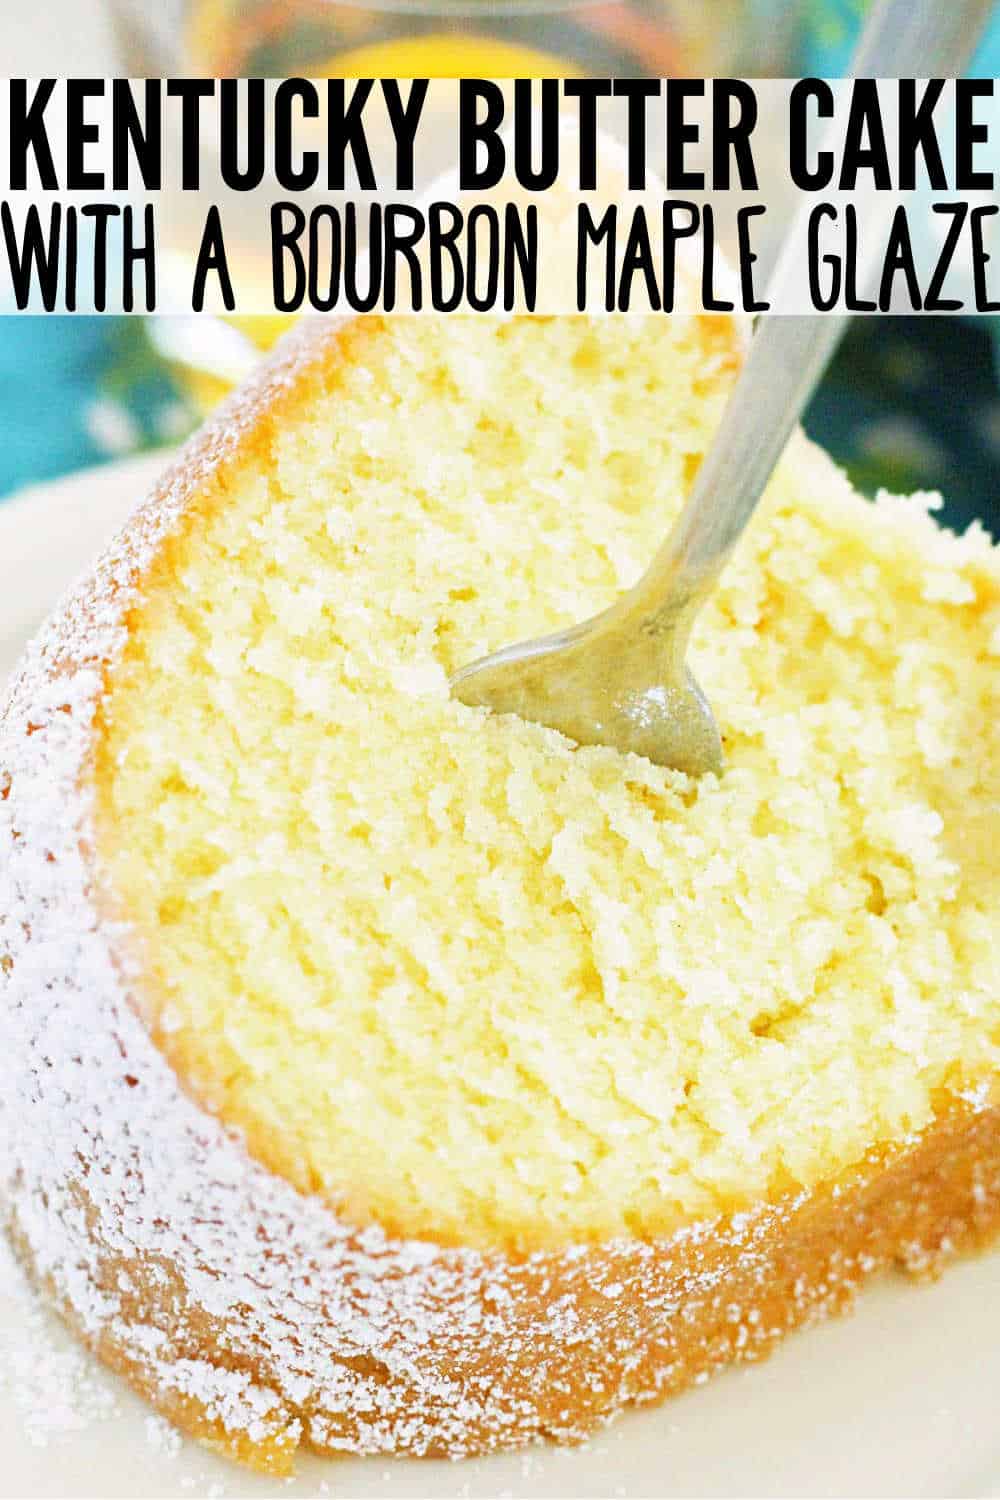 Bourbon Glazed Kentucky Butter Cake is a decadent and buttery bundt cake that takes just minutes to get into the oven. via @foodtasticmom